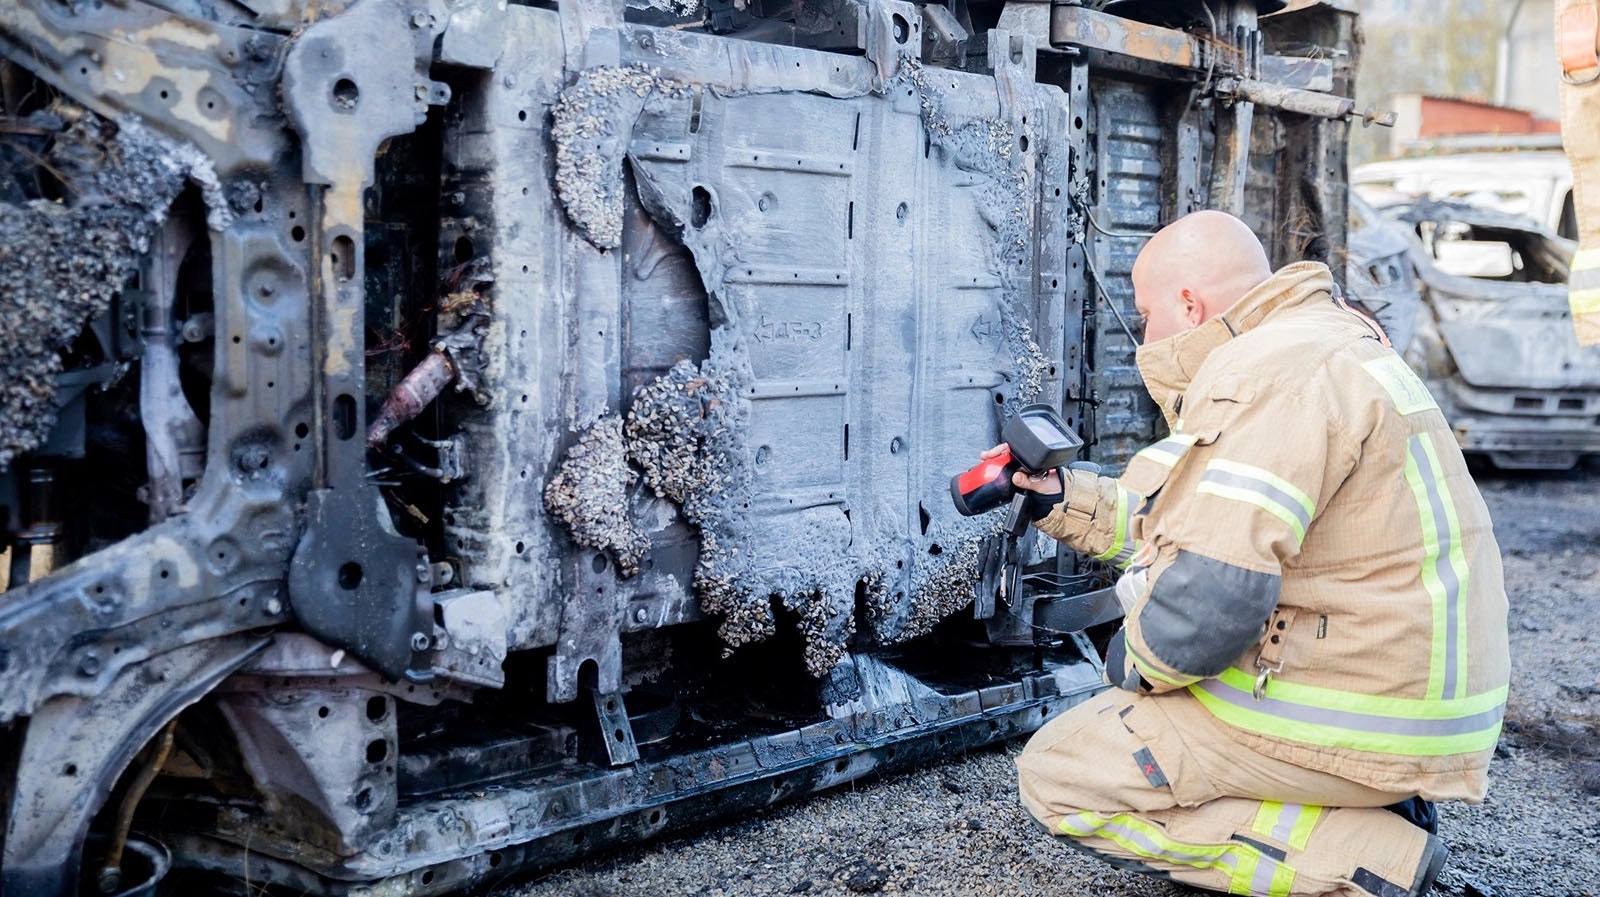 A firefighter inspects the underside of an electric vehicle after it burned.